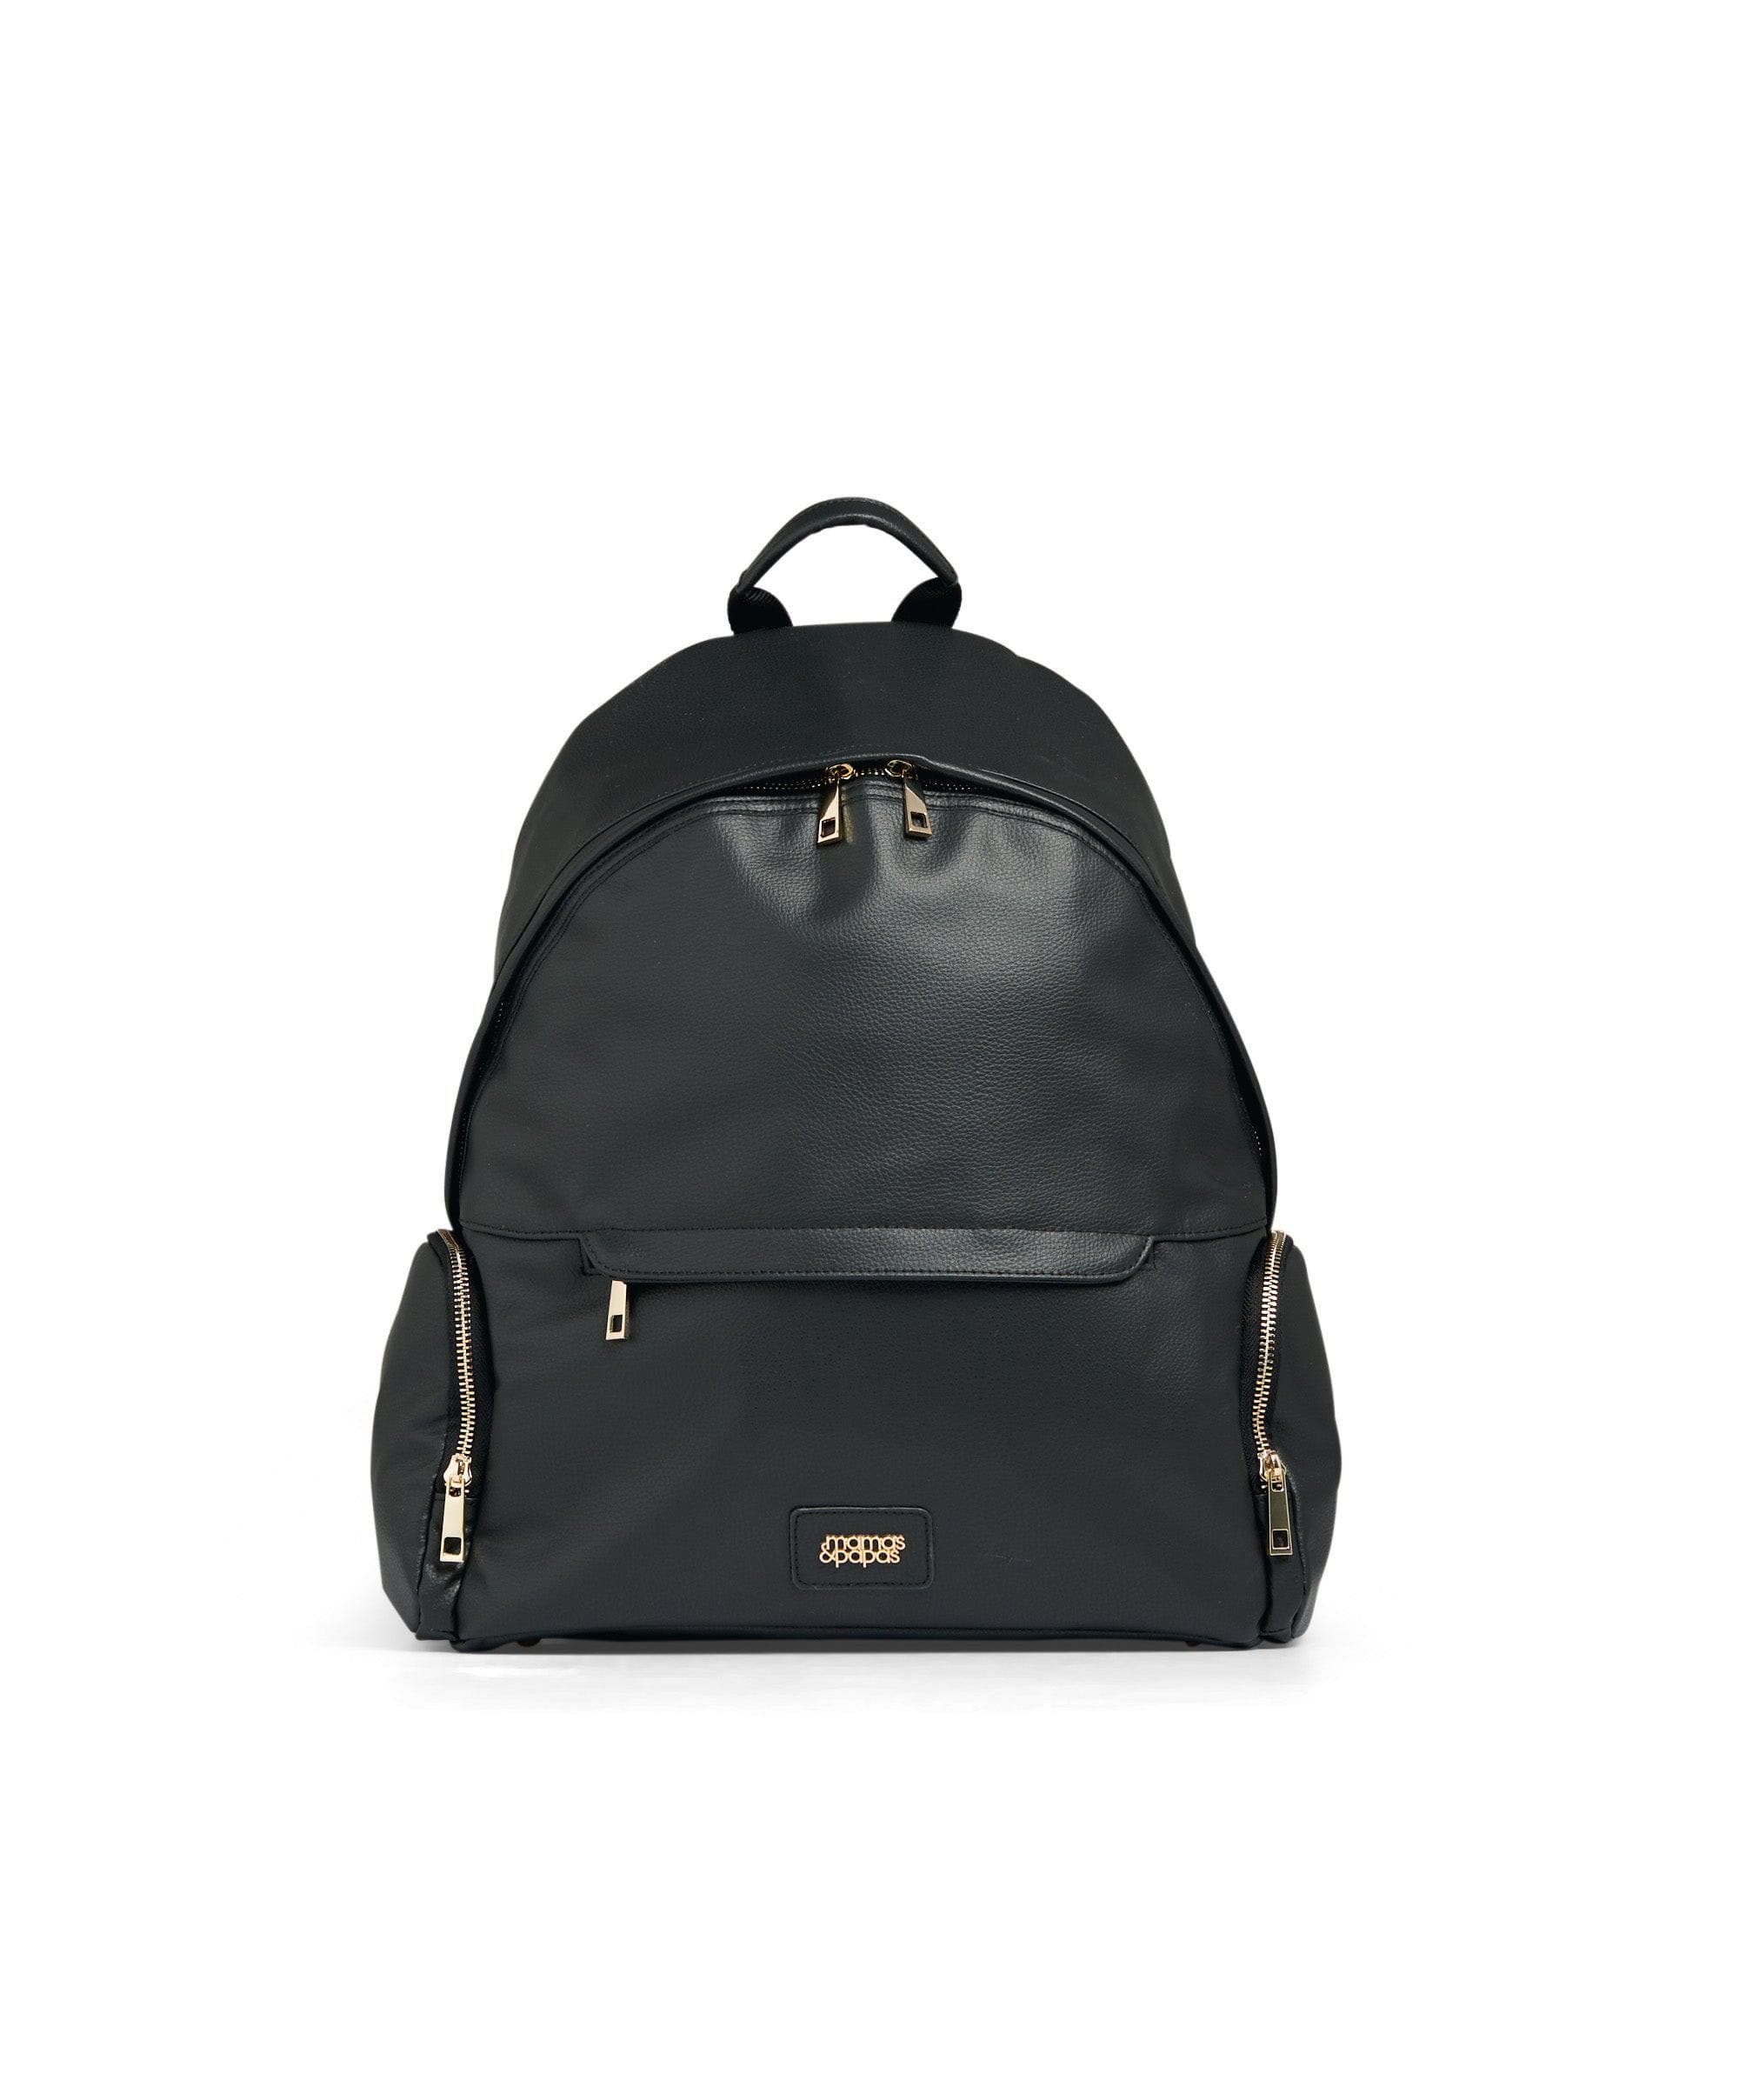 Strada Luxe Changing Backpack - Black/Gold